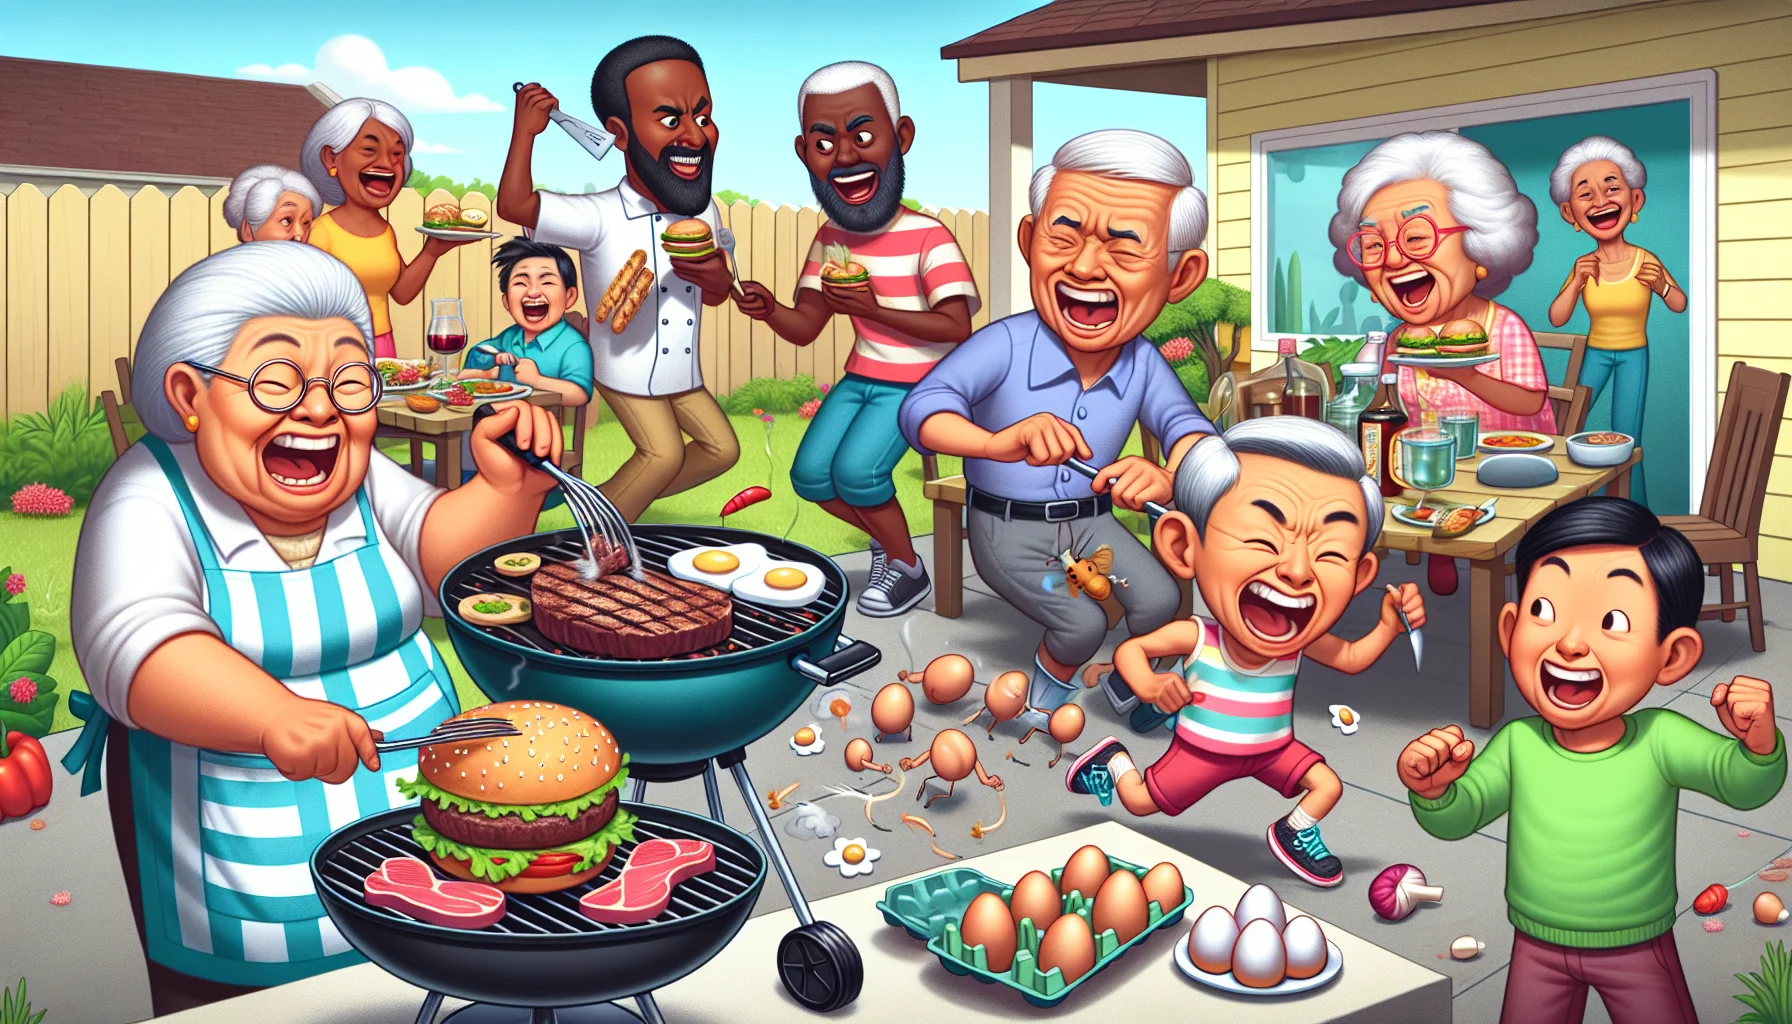 Imagine a humorous scene at a lively senior citizen's cookout. The elderly guests are cheerfully engaged in cooking and eating various types of low fiber, high protein foods. An elderly Asian woman is grilling steak while laughing heartily with her friend, a black man who is trying to cleverly balance a large platter of eggs. Nearby, a Hispanic gentleman and a South Asian lady are engaged in a mock intense debate over the best high protein recipes. Meanwhile, a Caucasian woman is playfully chasing her runaway burger that's grown tiny legs in this animated scenario.